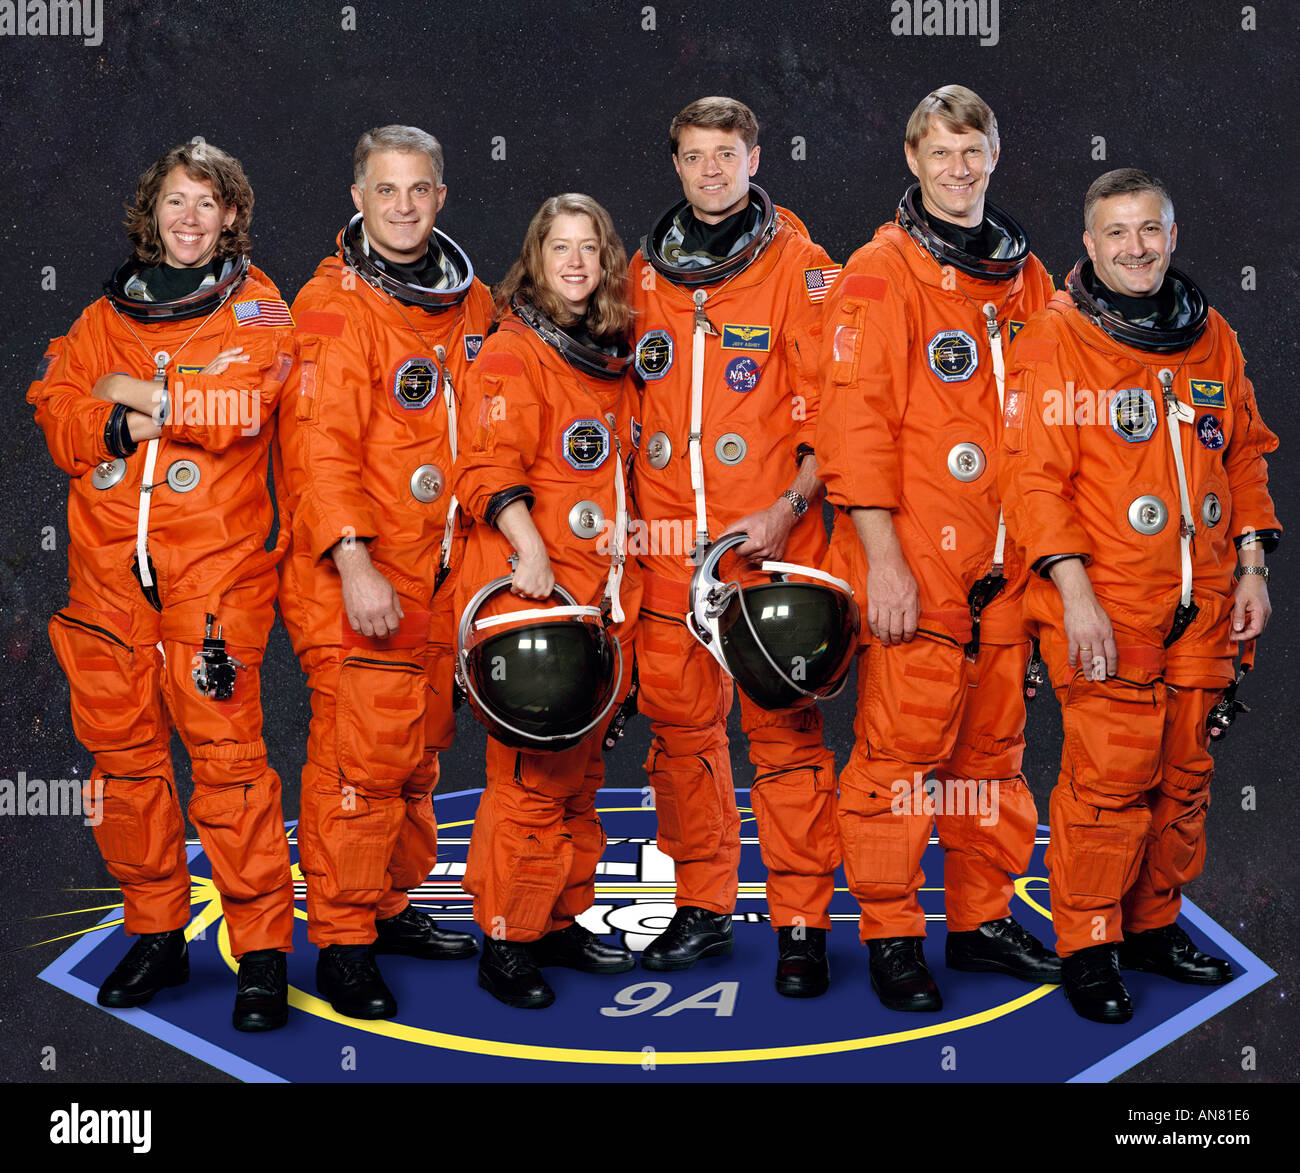 five astronauts and cosmonaut pose for the STS 112 crew portrait in orange space suits Stock Photo